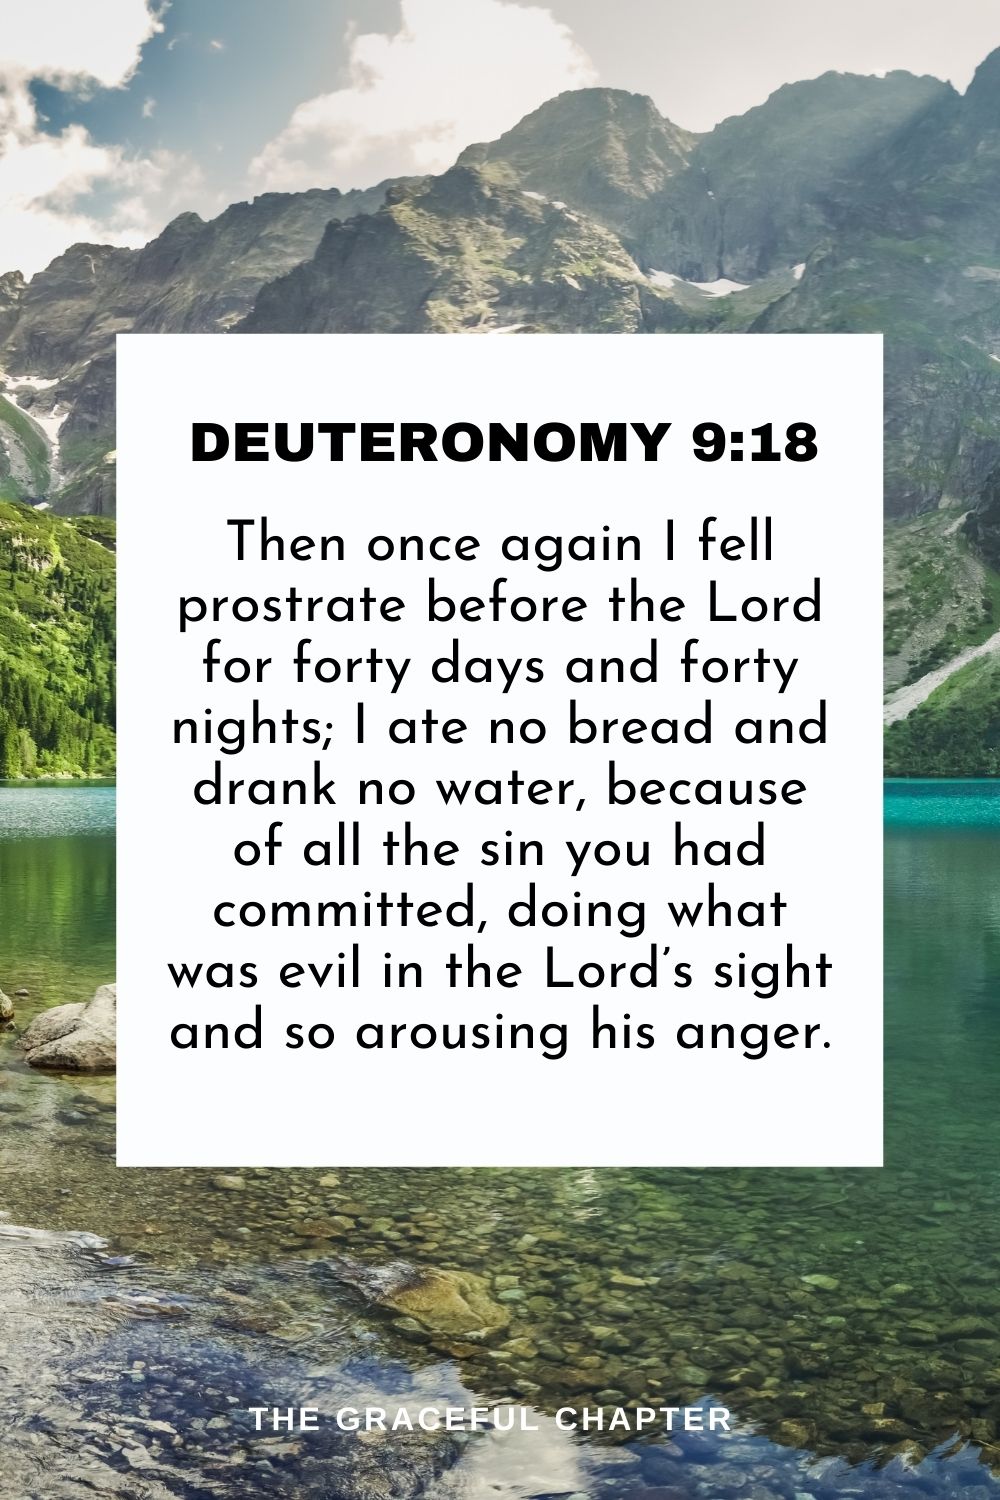 Then once again I fell prostrate before the Lord for forty days and forty nights; I ate no bread and drank no water, because of all the sin you had committed, doing what was evil in the Lord’s sight and so arousing his anger. Deuteronomy 9:18